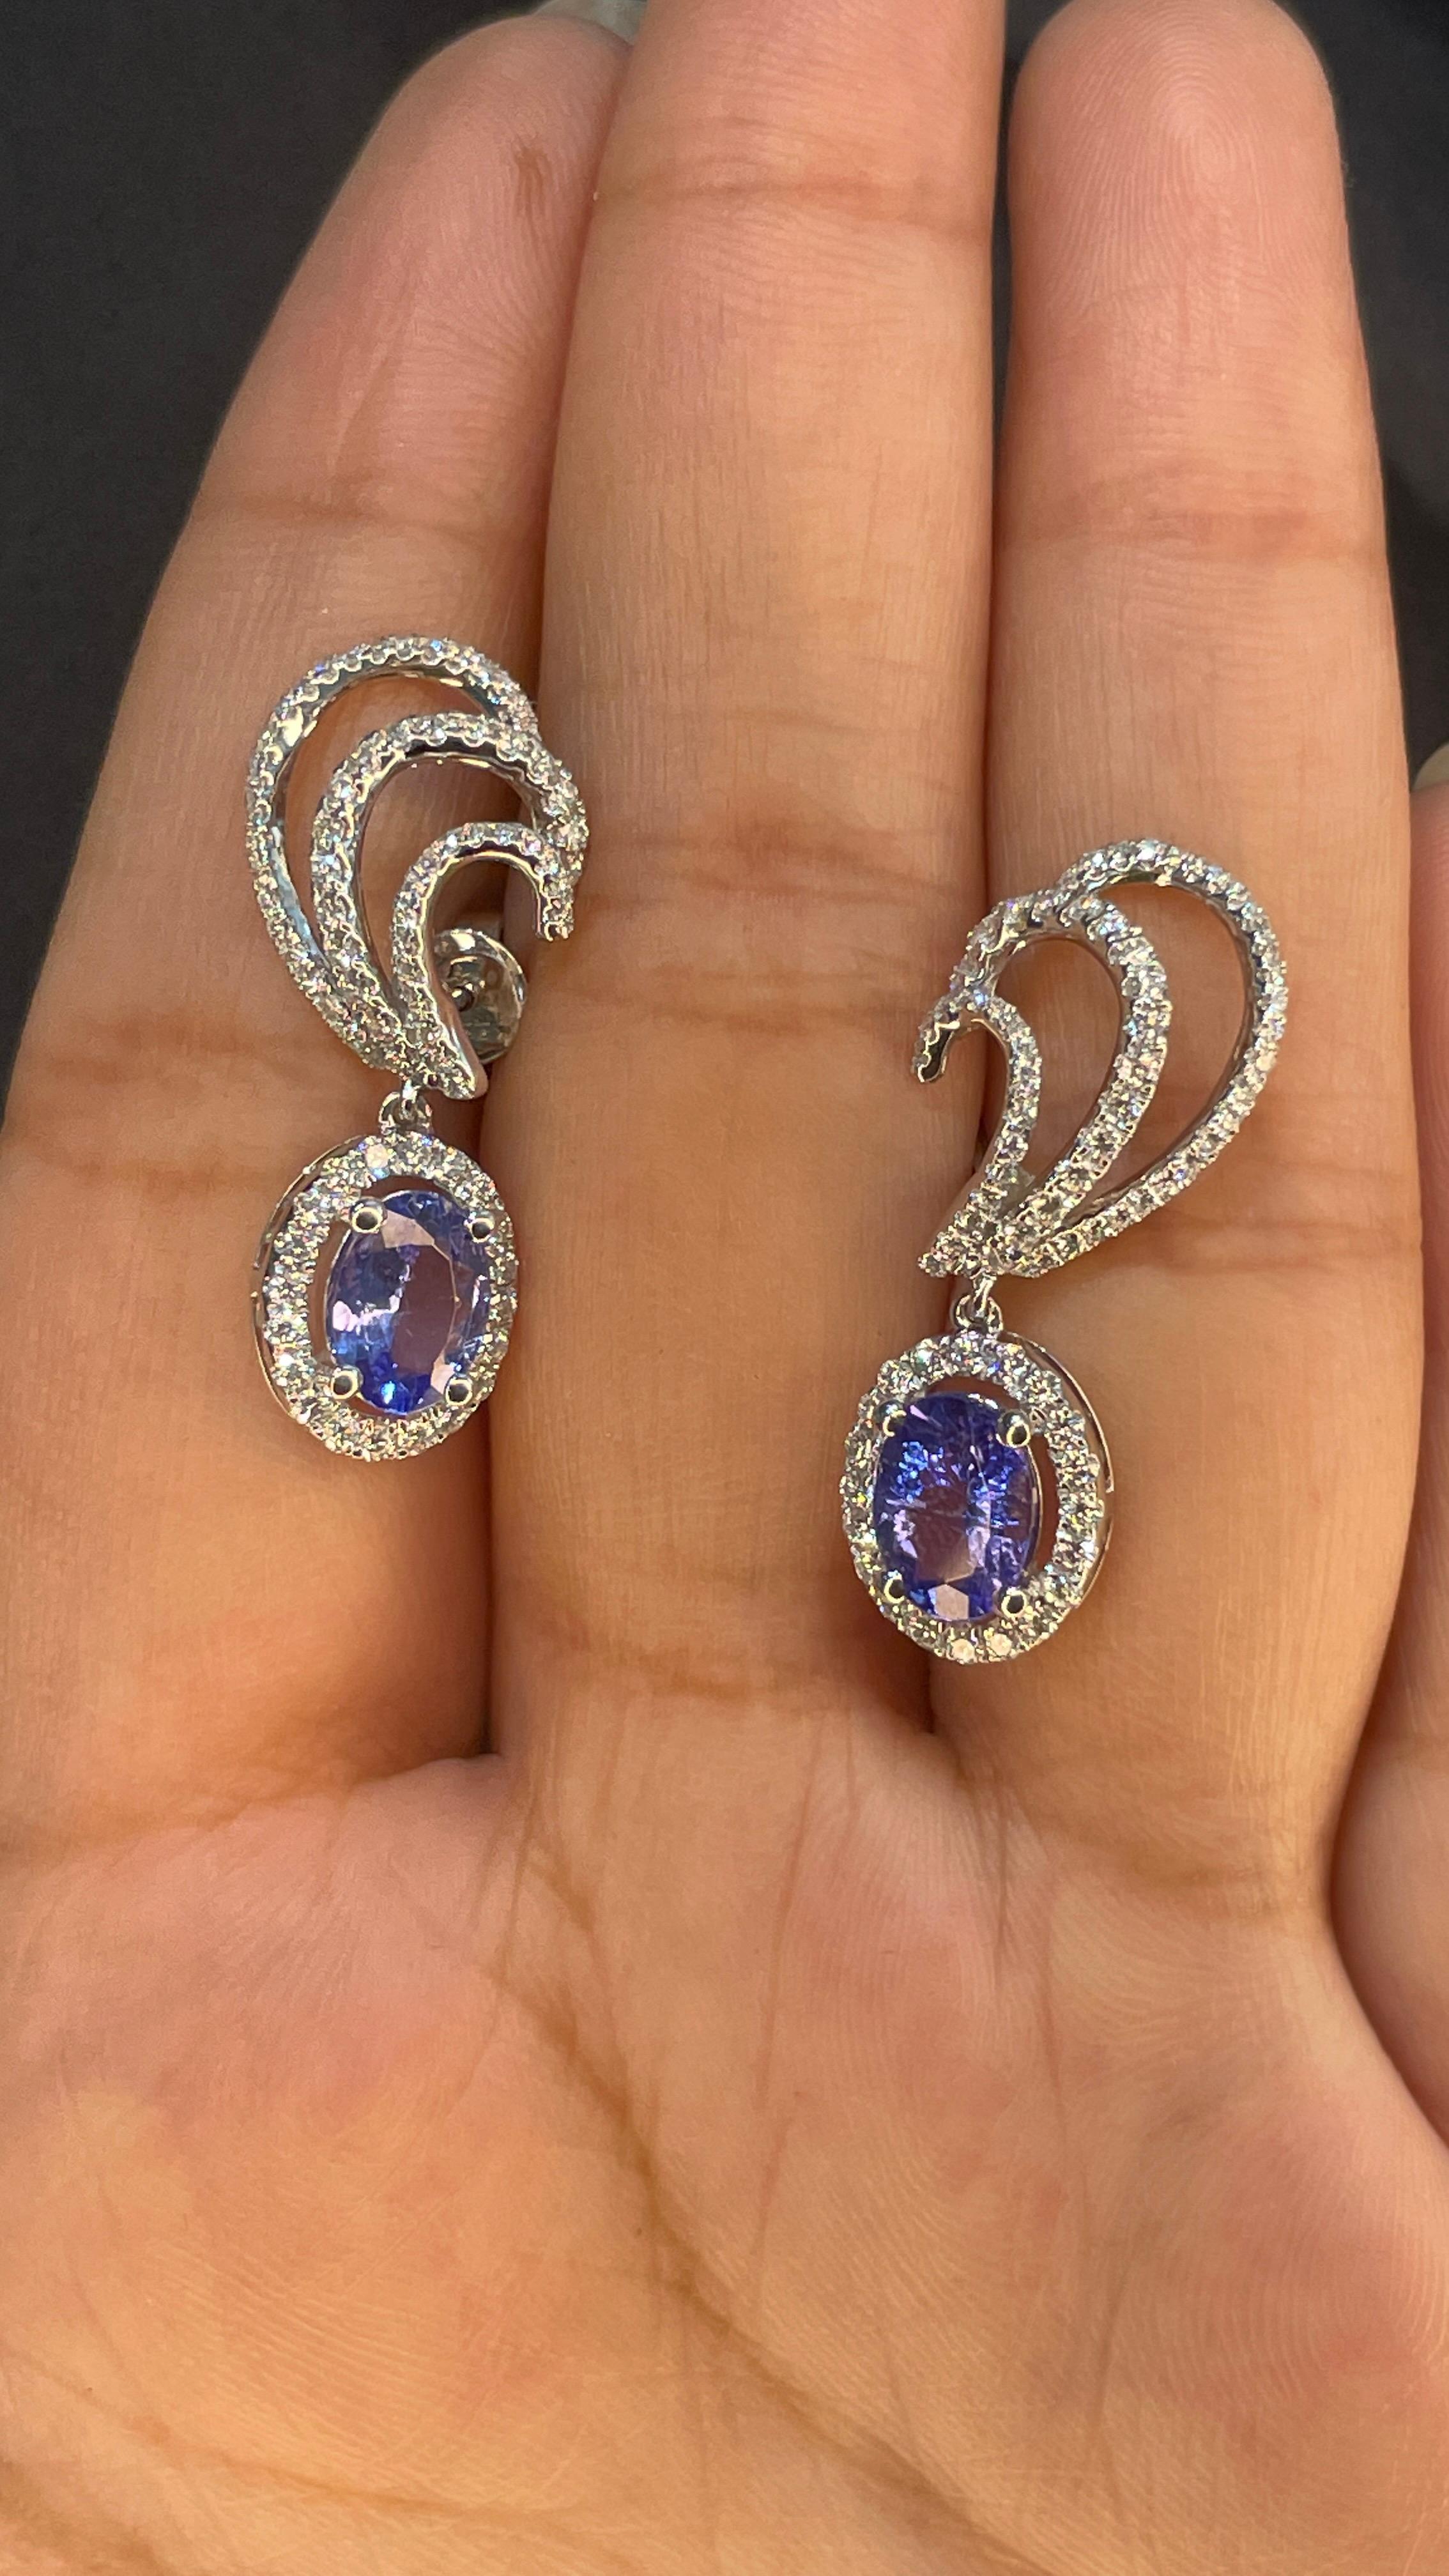 Oval Cut 1.98 Carat Tanzanite and Diamond Designer Stud Earrings in 14K White Gold For Sale